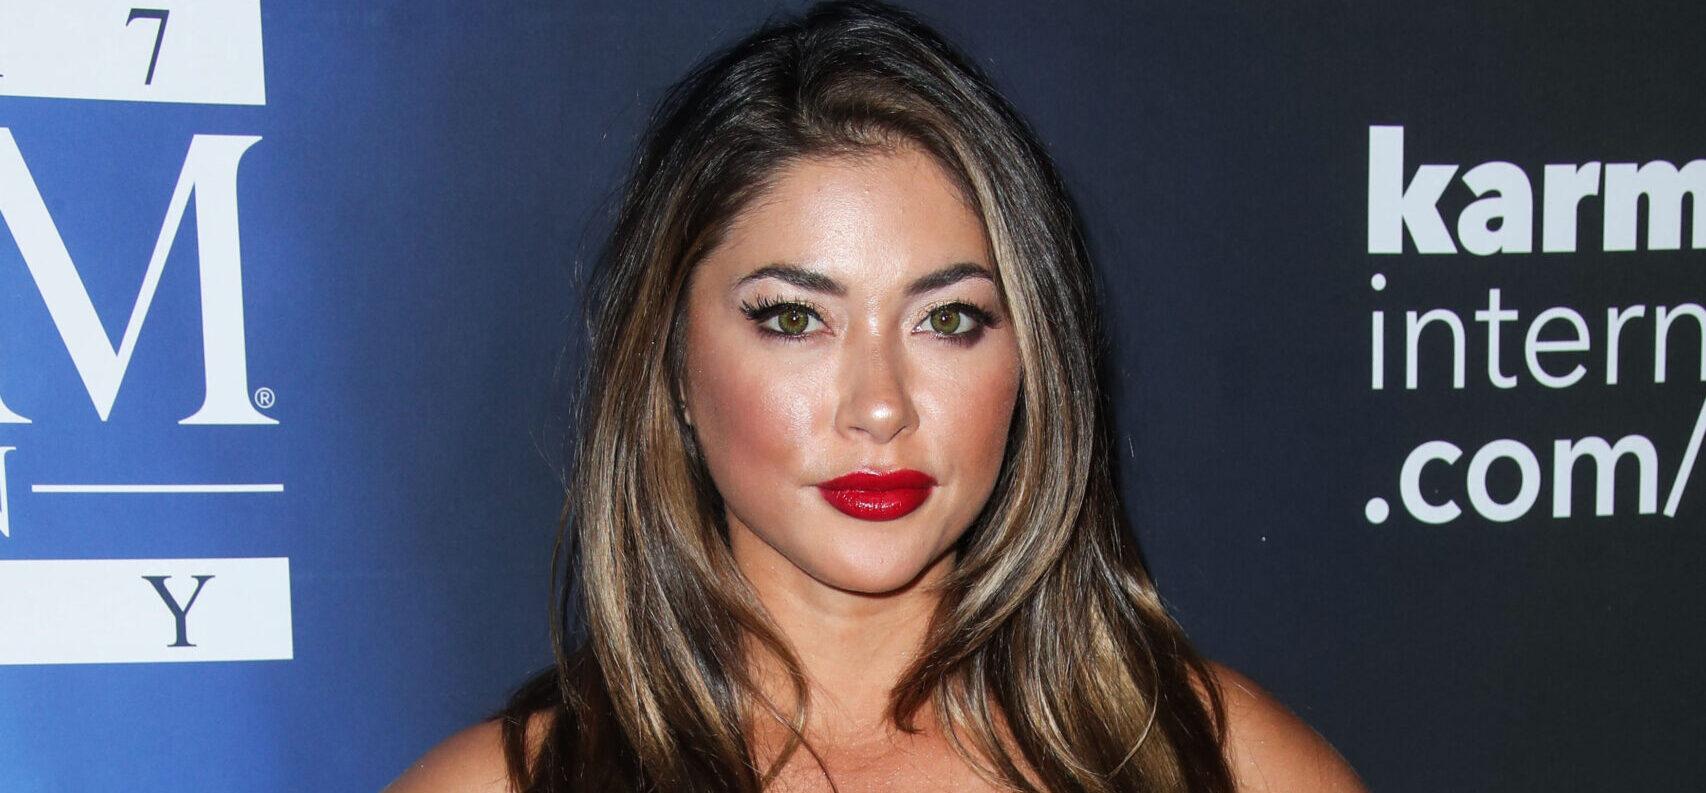 Arianny Celeste Is ‘Not Your Average Barbie’ In Pink Bathing Suit